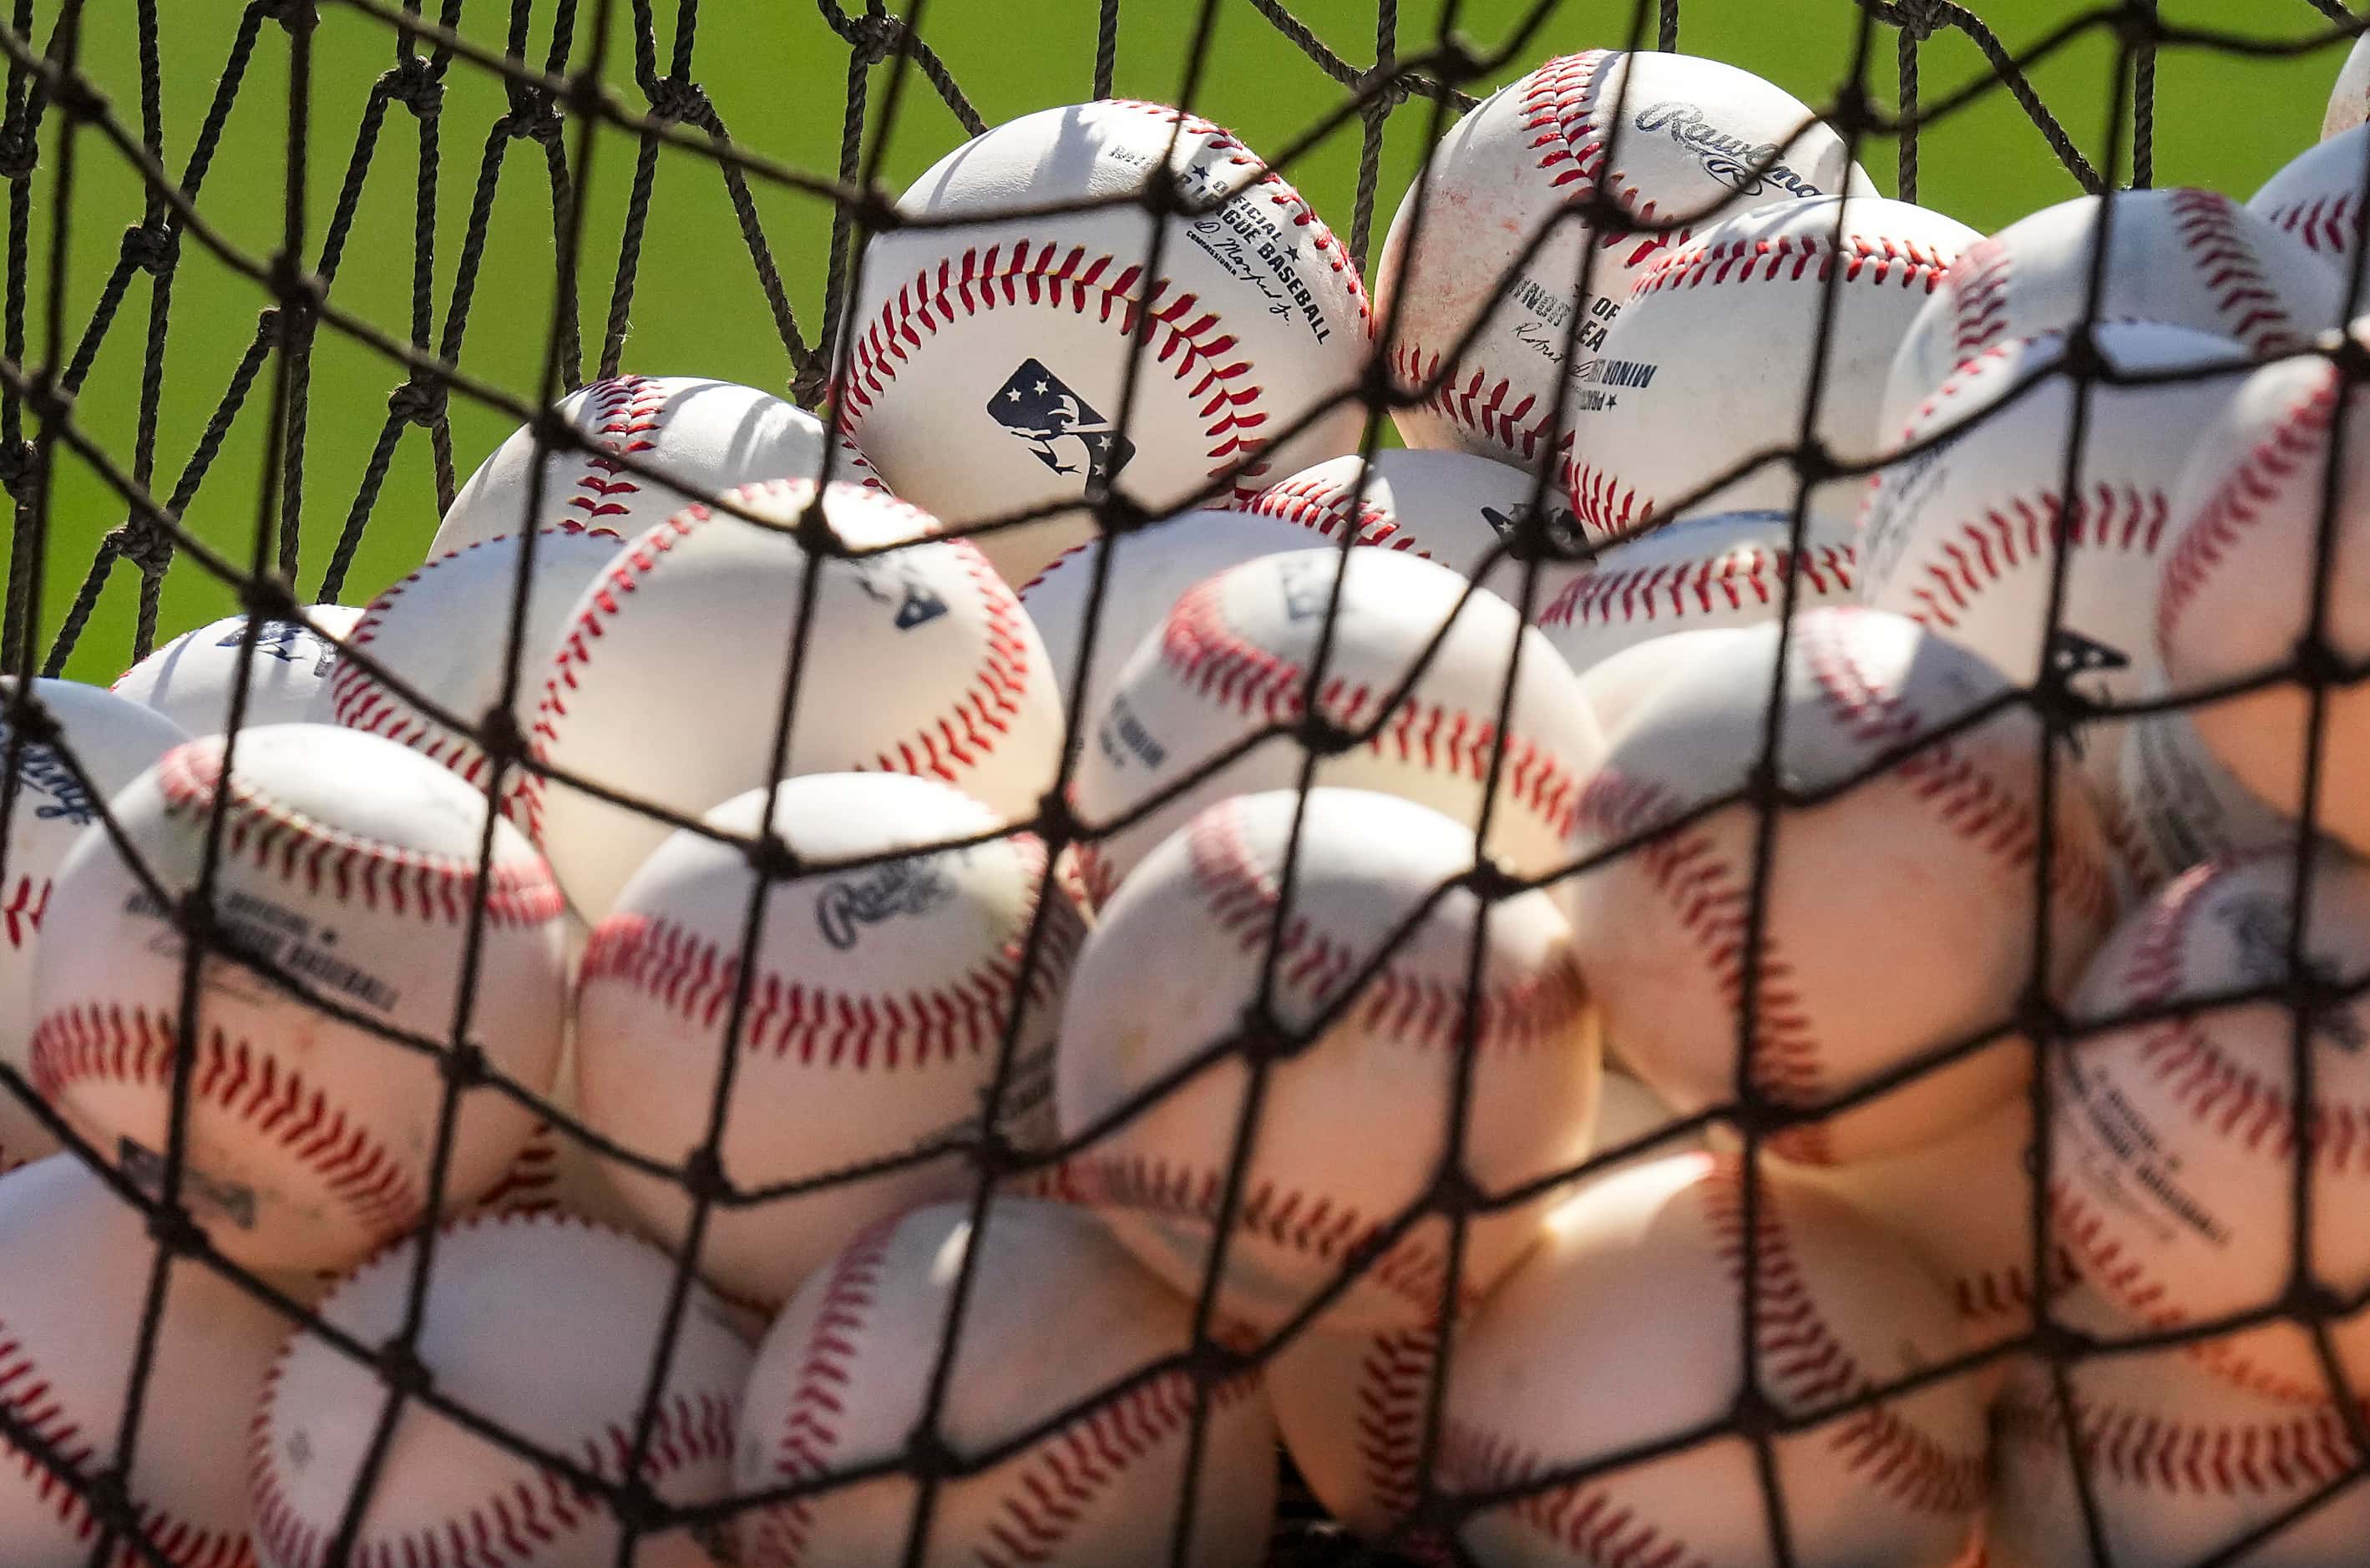 A basket of practice baseballs sits ready for a fielding drill during a Texas Rangers spring...